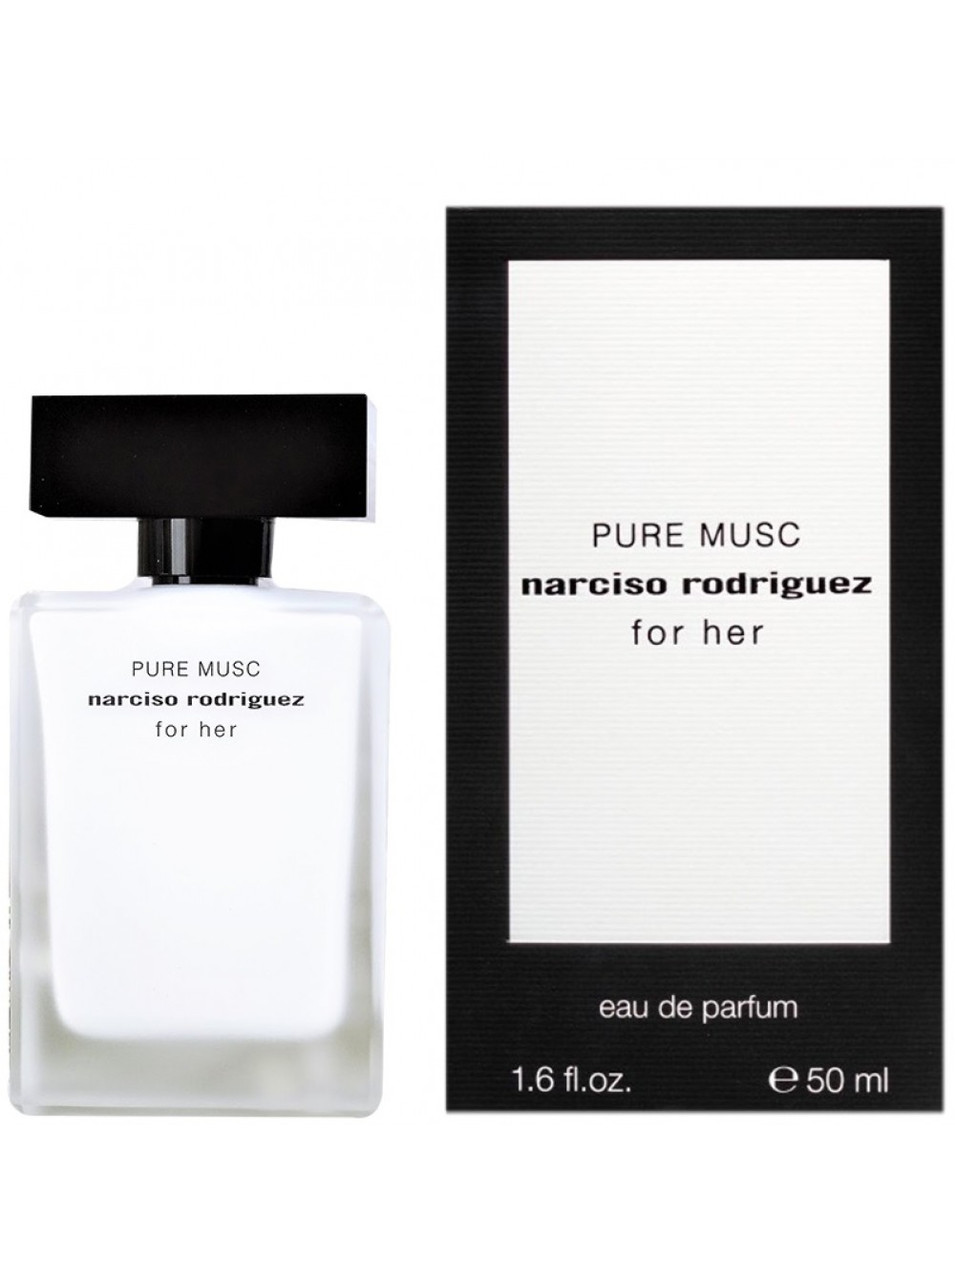 Туалетная вода narciso. Narciso Rodriguez Pure Musk. Narciso Rodriguez for her Narciso Rodriguez 30. Pure Musk Narciso Rodriguez for her. Narciso Narciso Rodriguez for women 50ml.